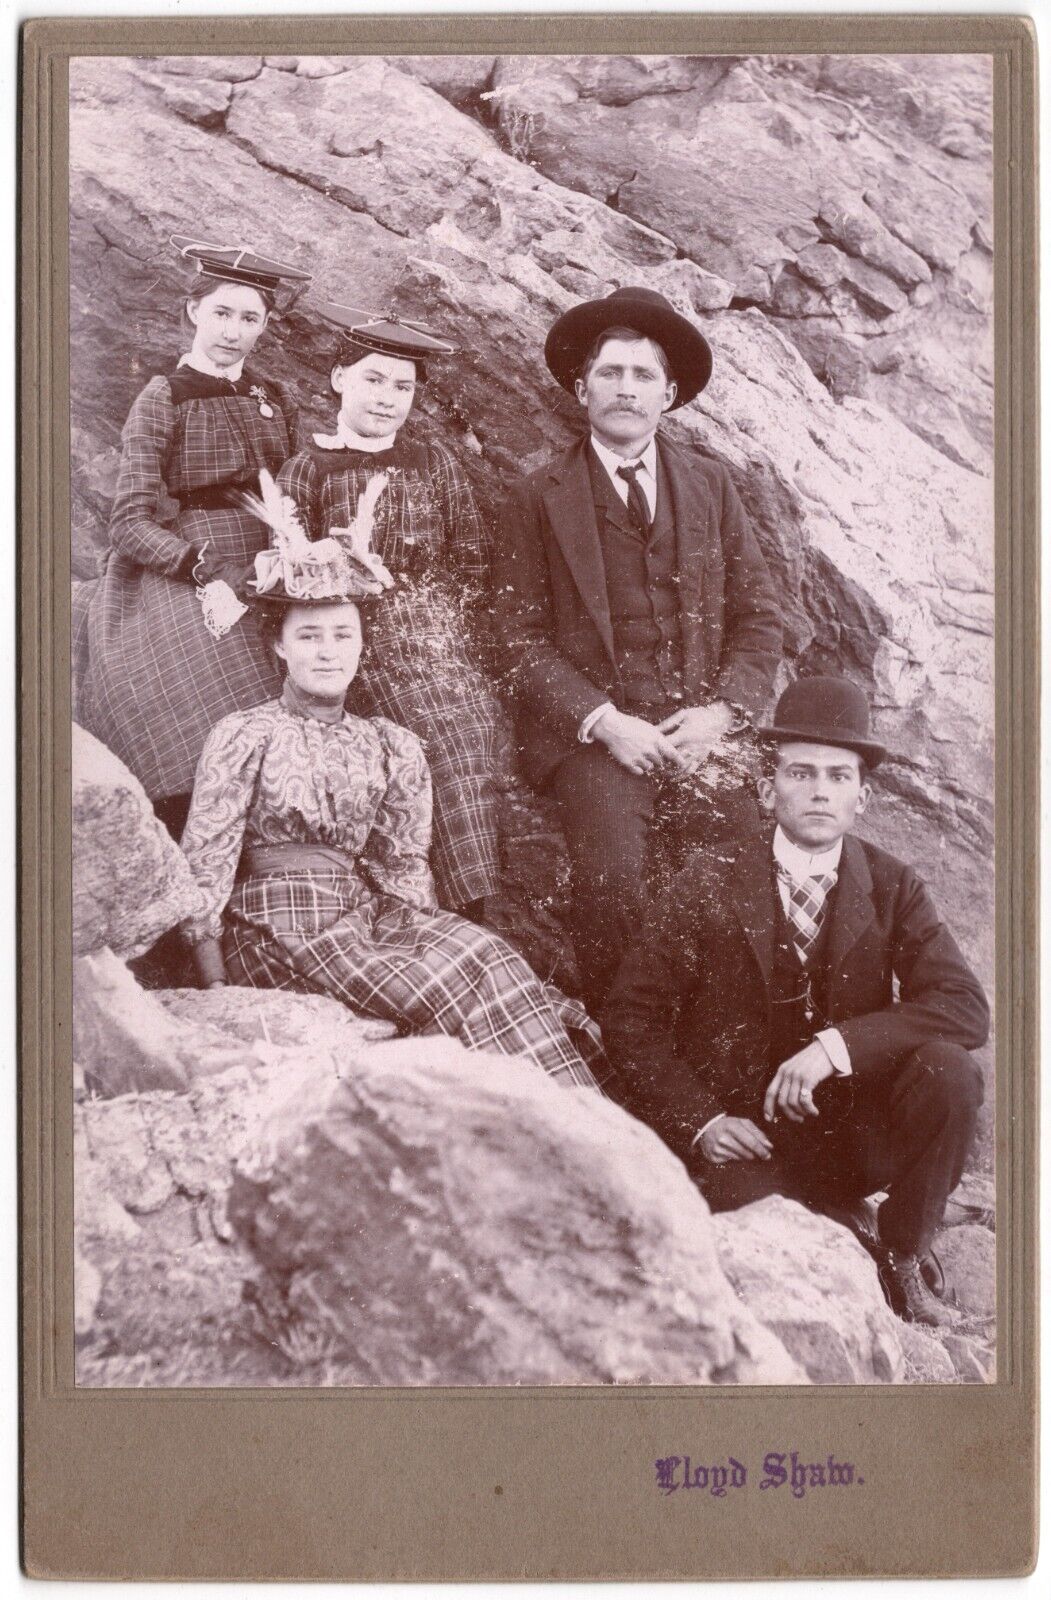 CIRCA 1900s CABINET CARD LLOYD STUDIO FAMILY OUTING GROUP ON ROCK FACE BYRD